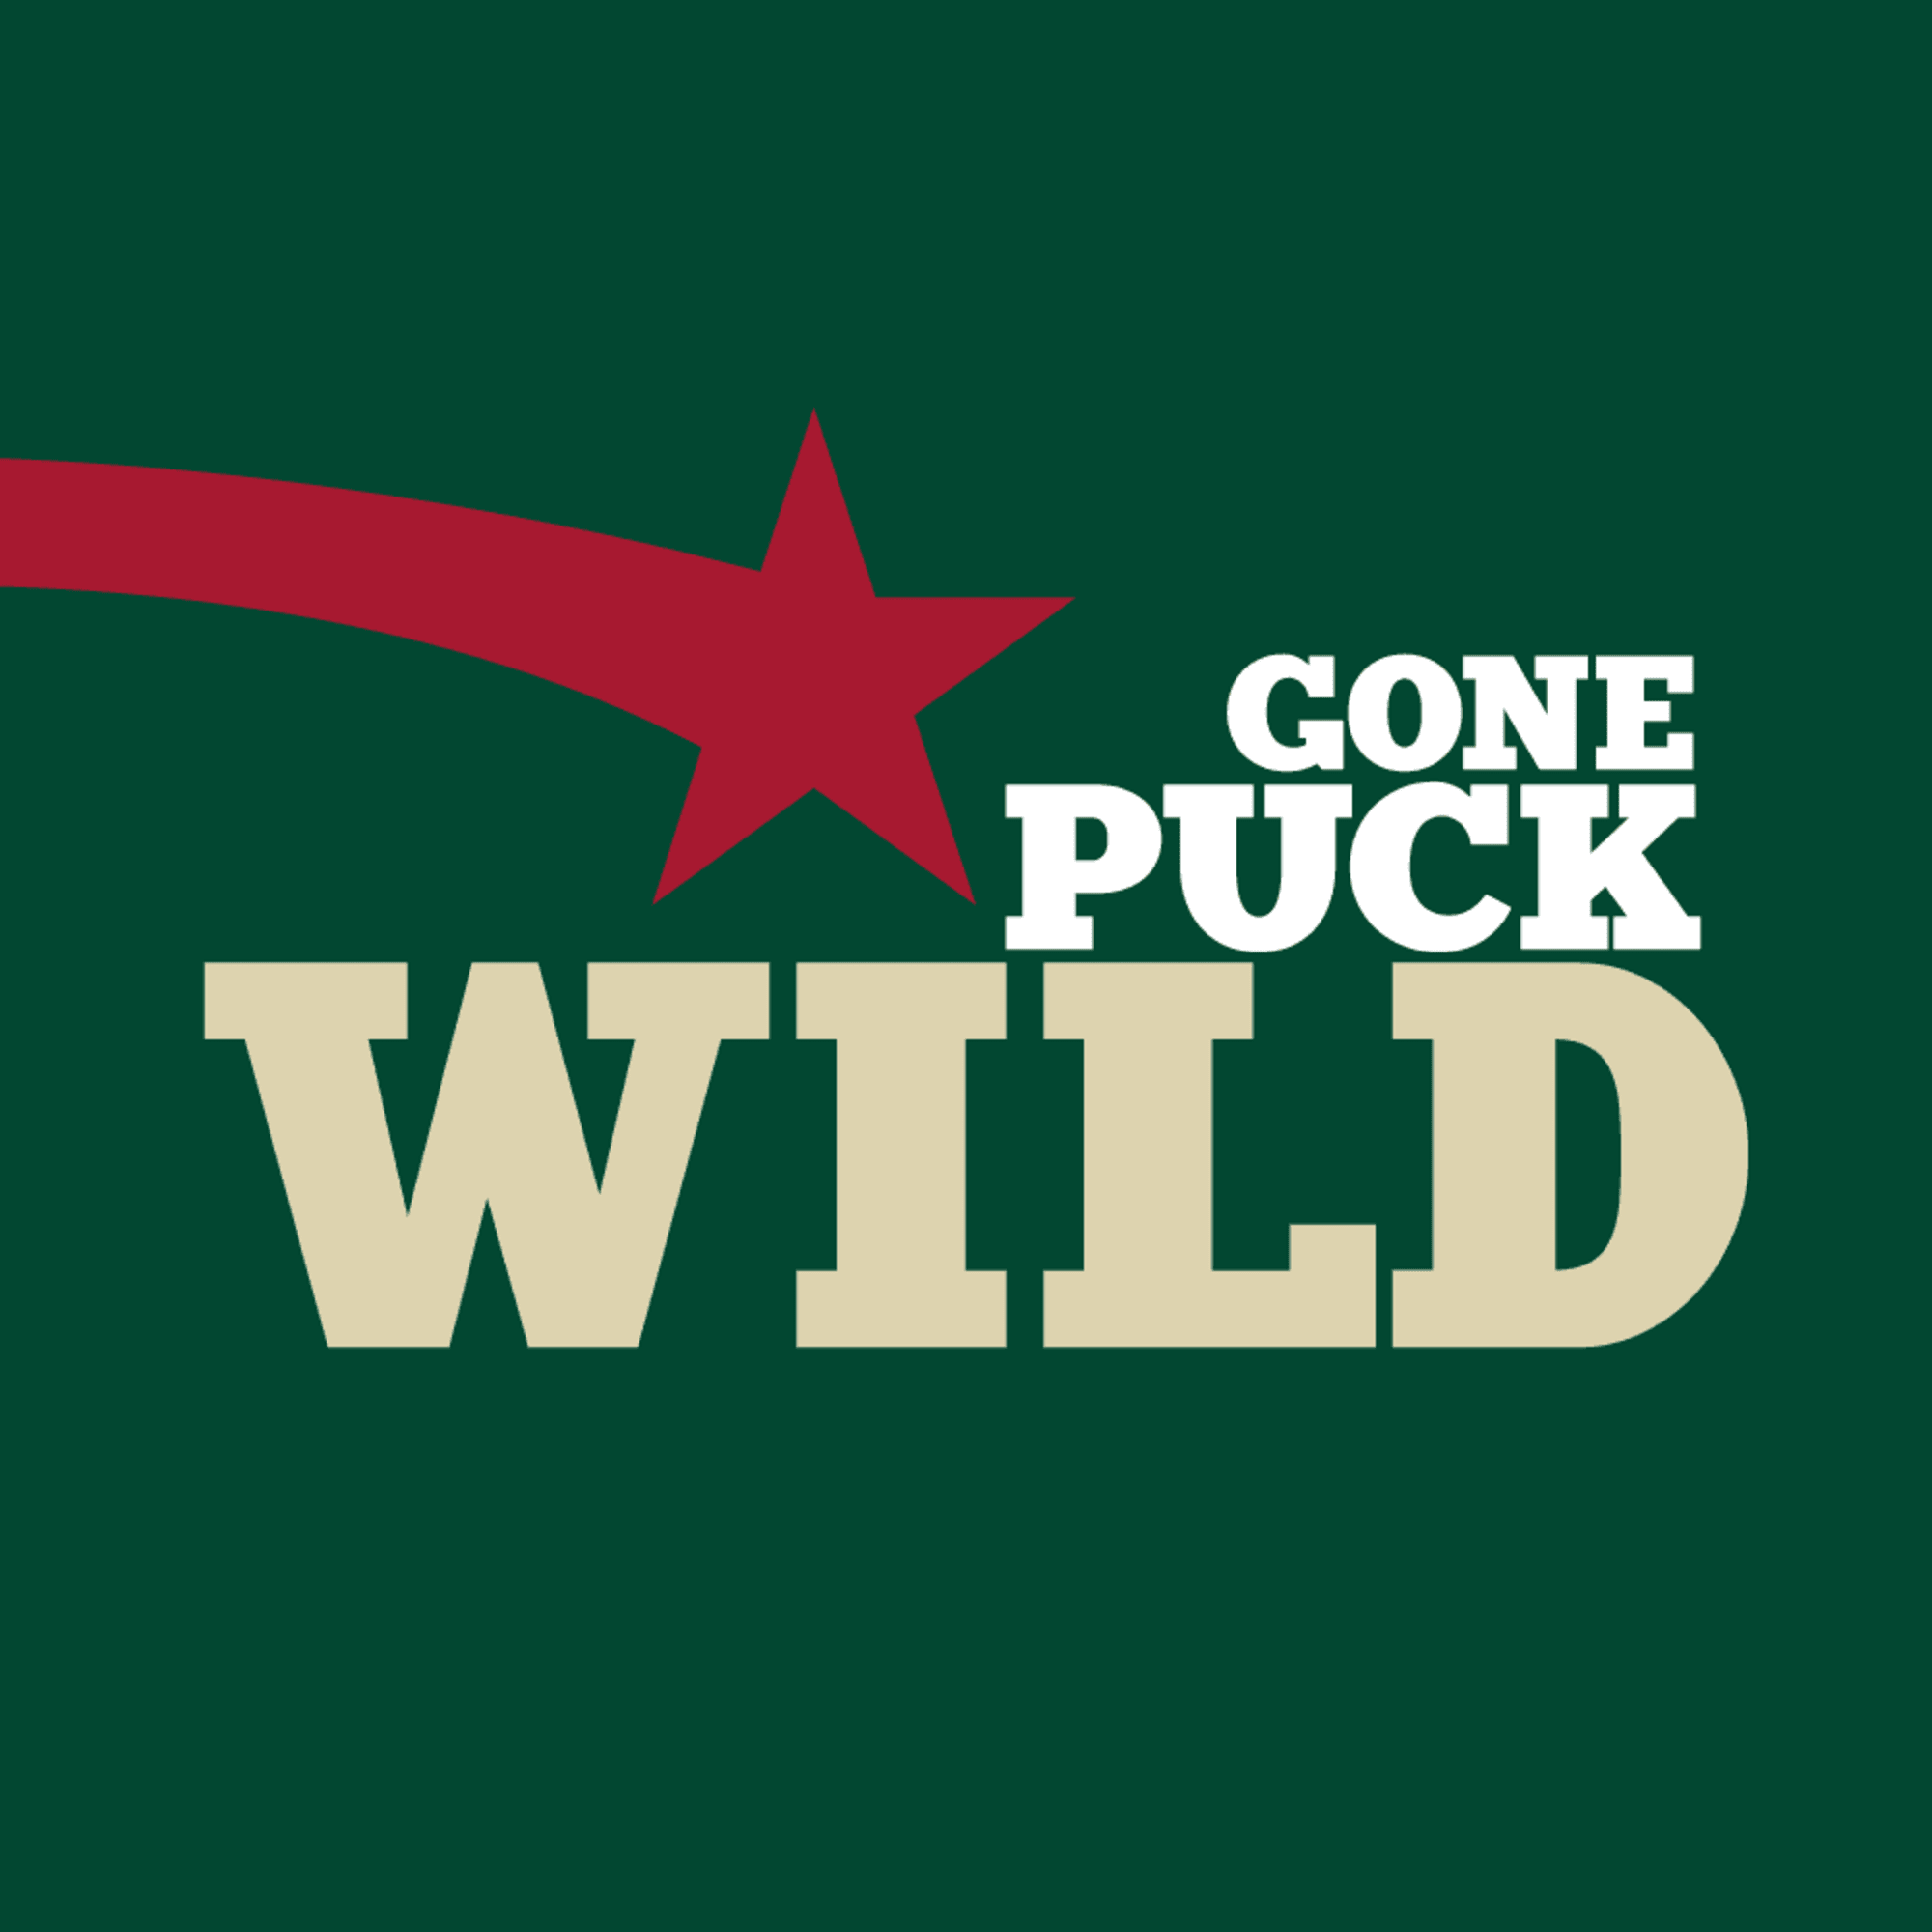 Ugly' wins for the Minnesota Wild but Kaprizov's game remains pretty